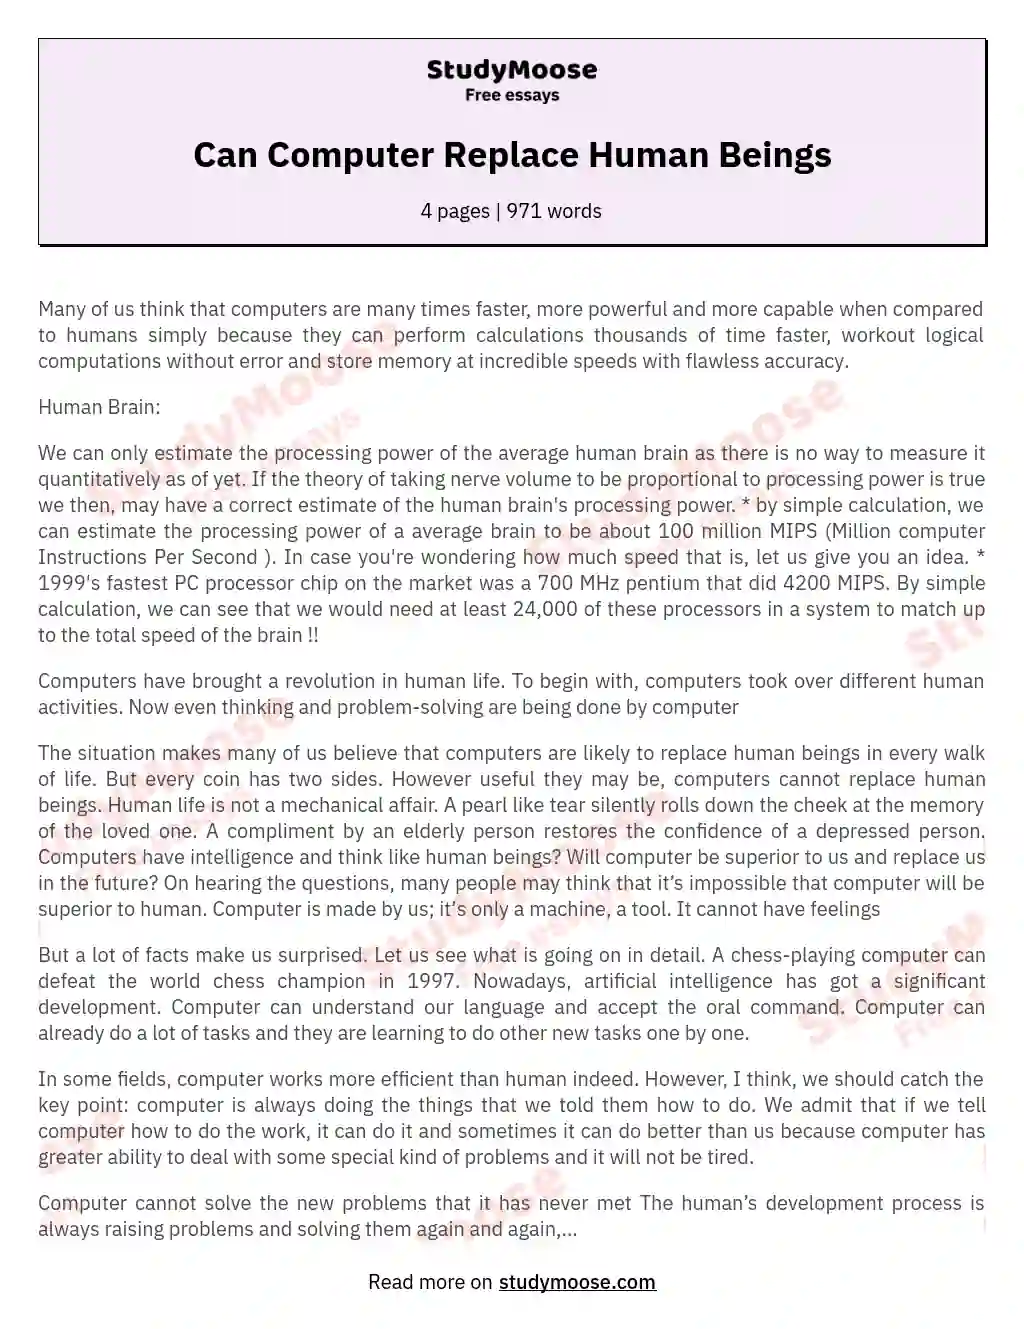 Can Computer Replace Human Beings essay